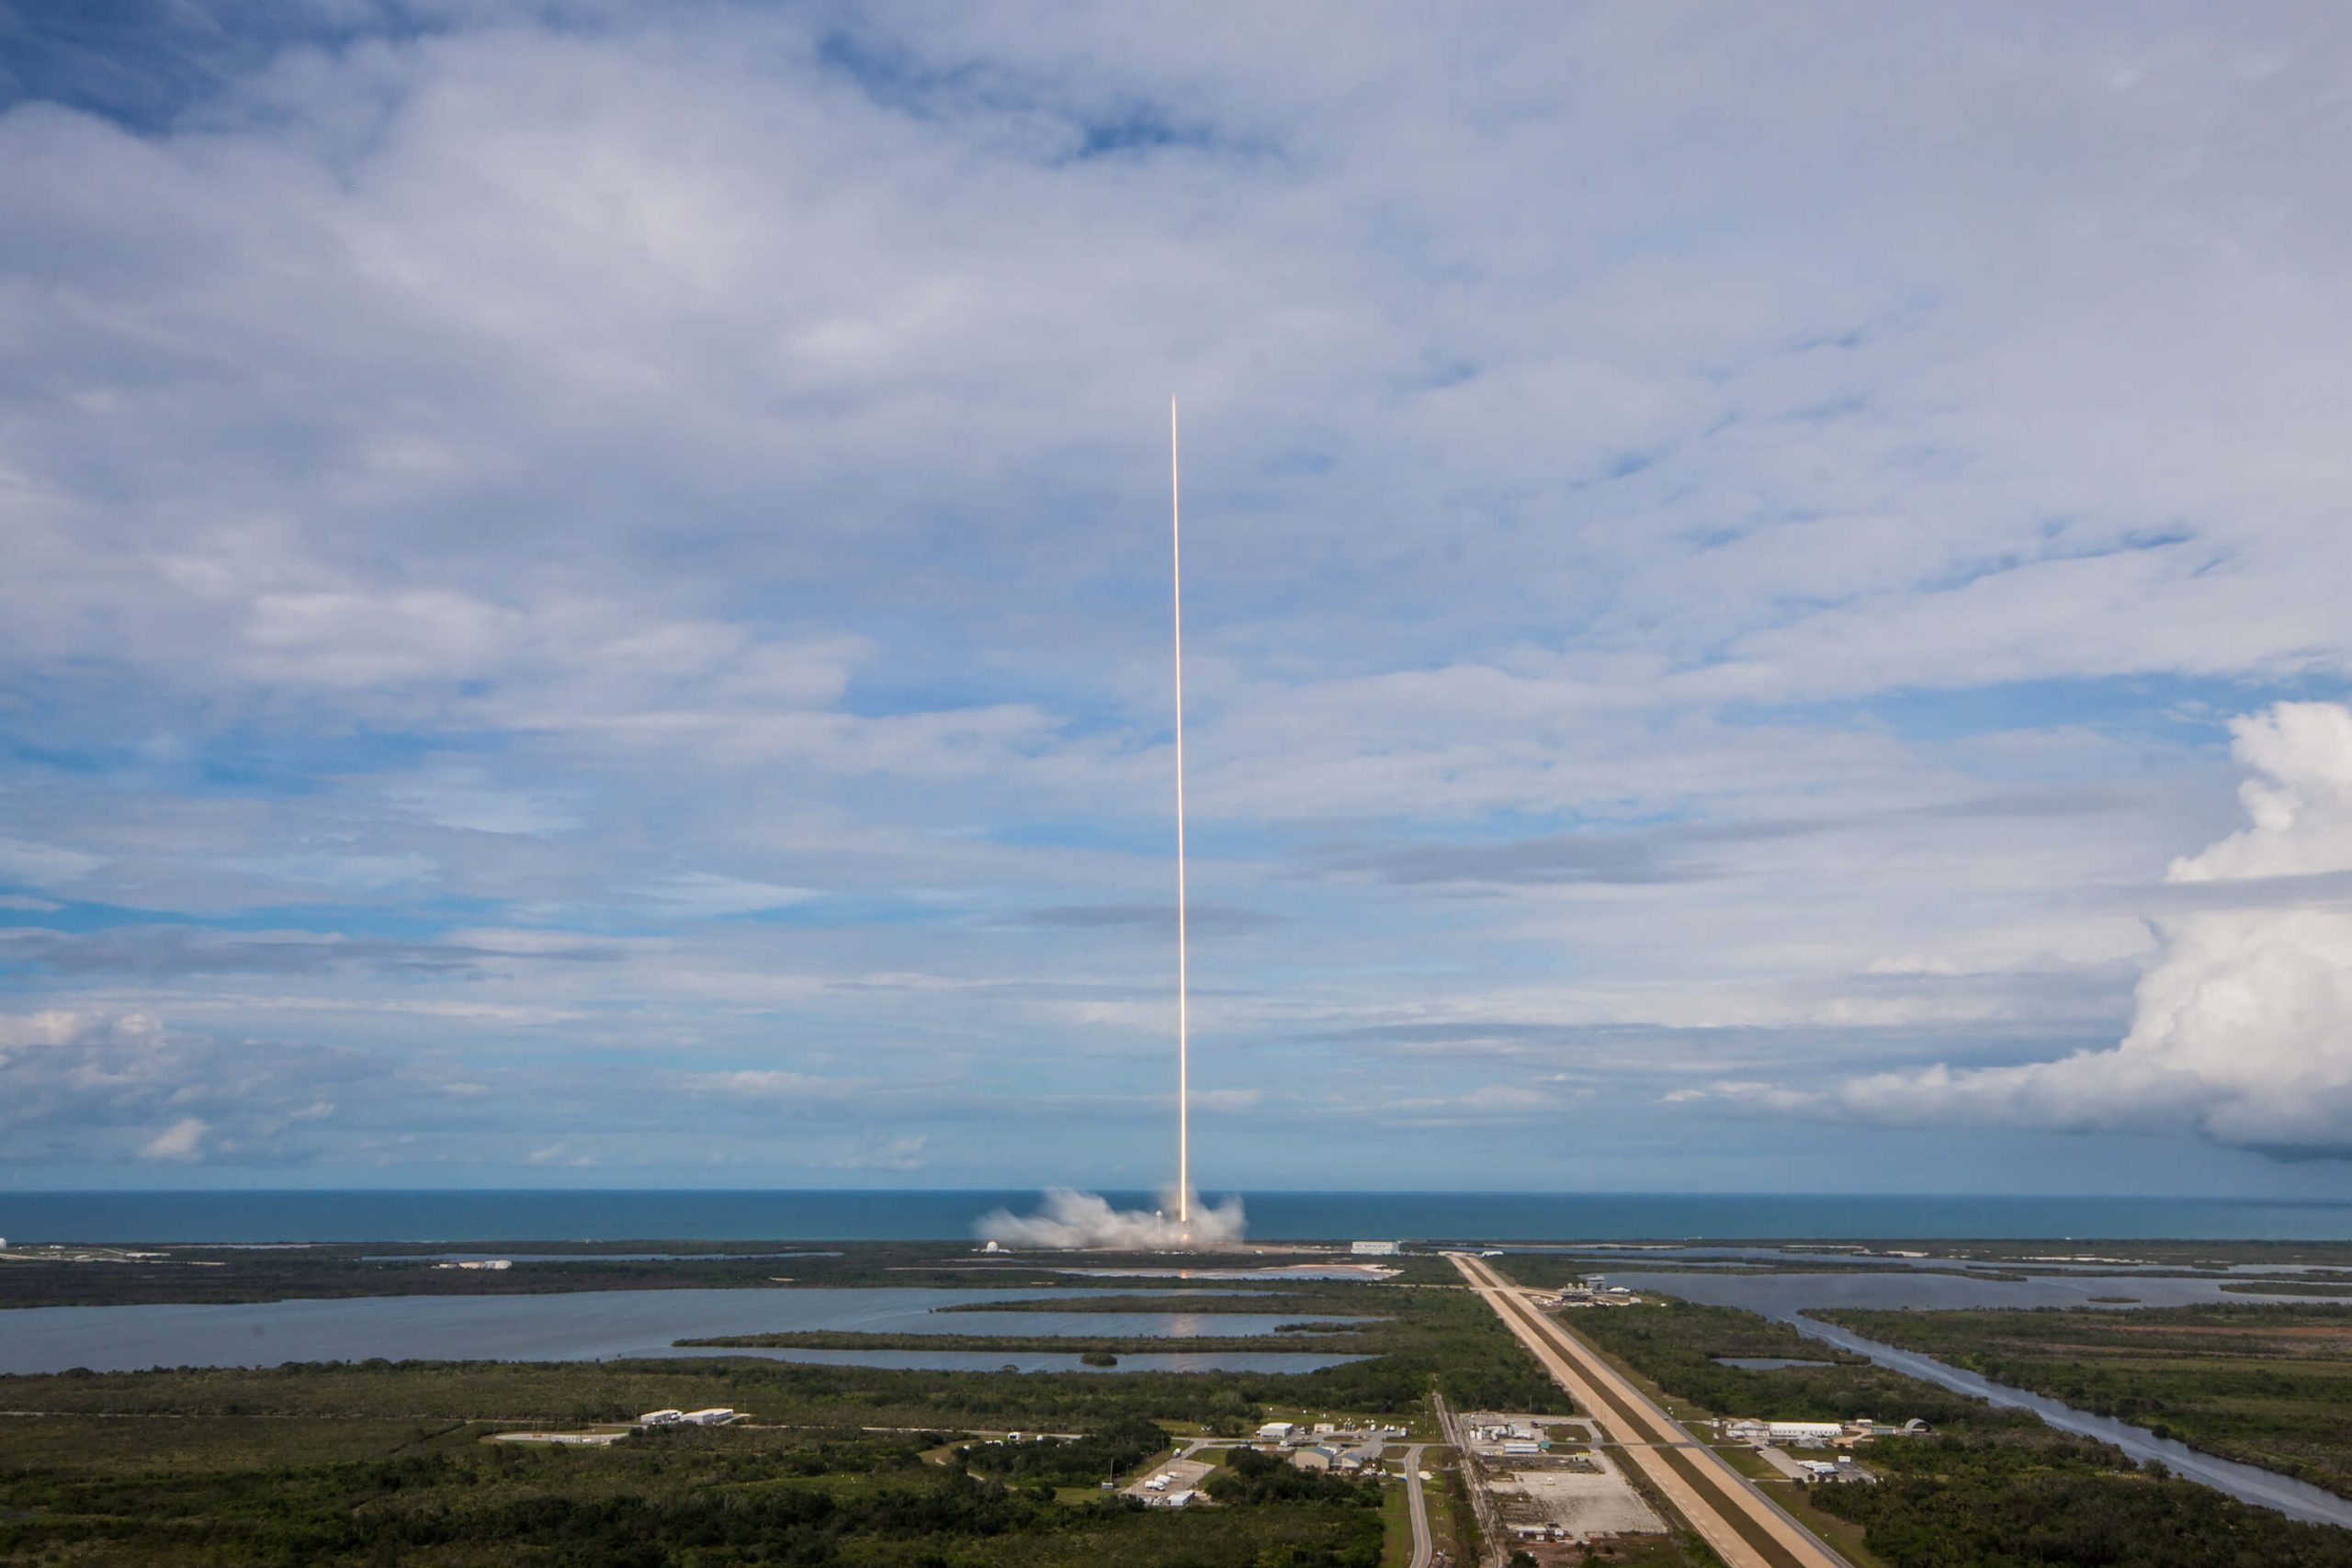 This particular Falcon 9 first stage booster launched in June 2017 in support of SpaceX’s eleventh commercial resupply service mission (CRS-11) and performed a successful landing back on Earth. Under NASA’s Commercial Space Program, partners including SpaceX and Boeing, are designing hardware to carry humans to space and will soon launch astronauts from U.S. soil. Courtesy of SpaceX